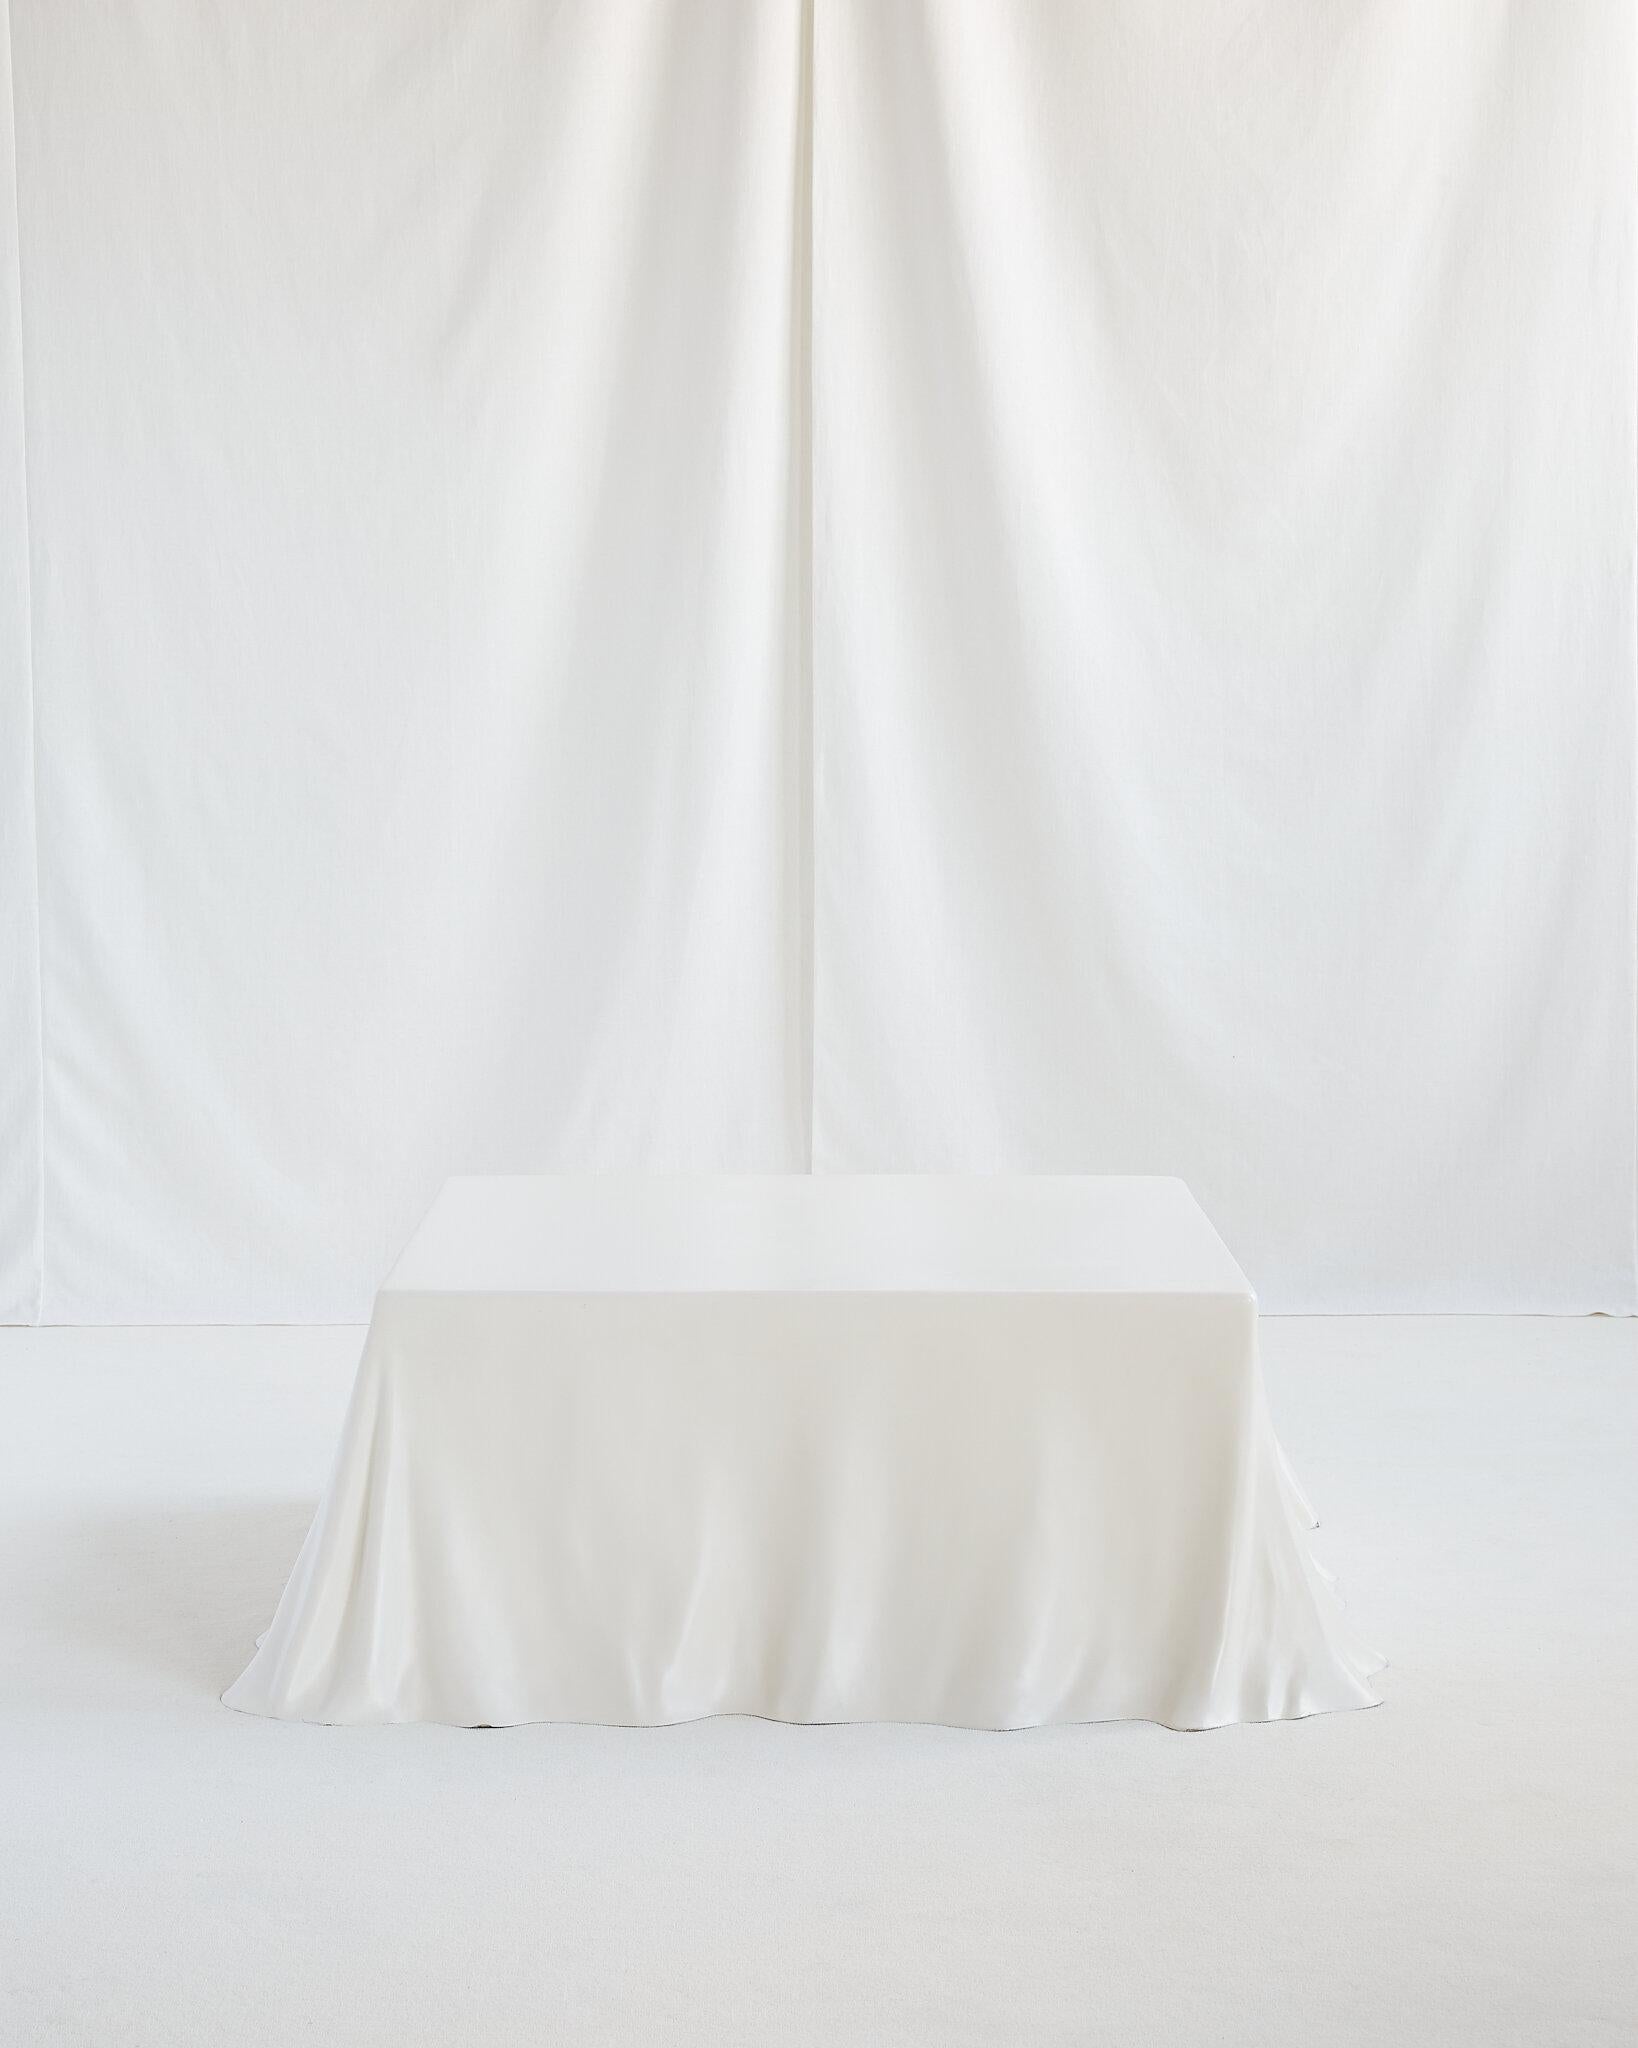 Tovaglia (‘Tablecloth’) table by Studio Tetrarch. Manufactured by Alberto Bazzani, Italy, and distributed by Stendig, USA.

Gel coated GRP (Fiberglass).

Italy c. 1969.

A true trompe l’oeil sculpture, these tables are quite rare - especially in